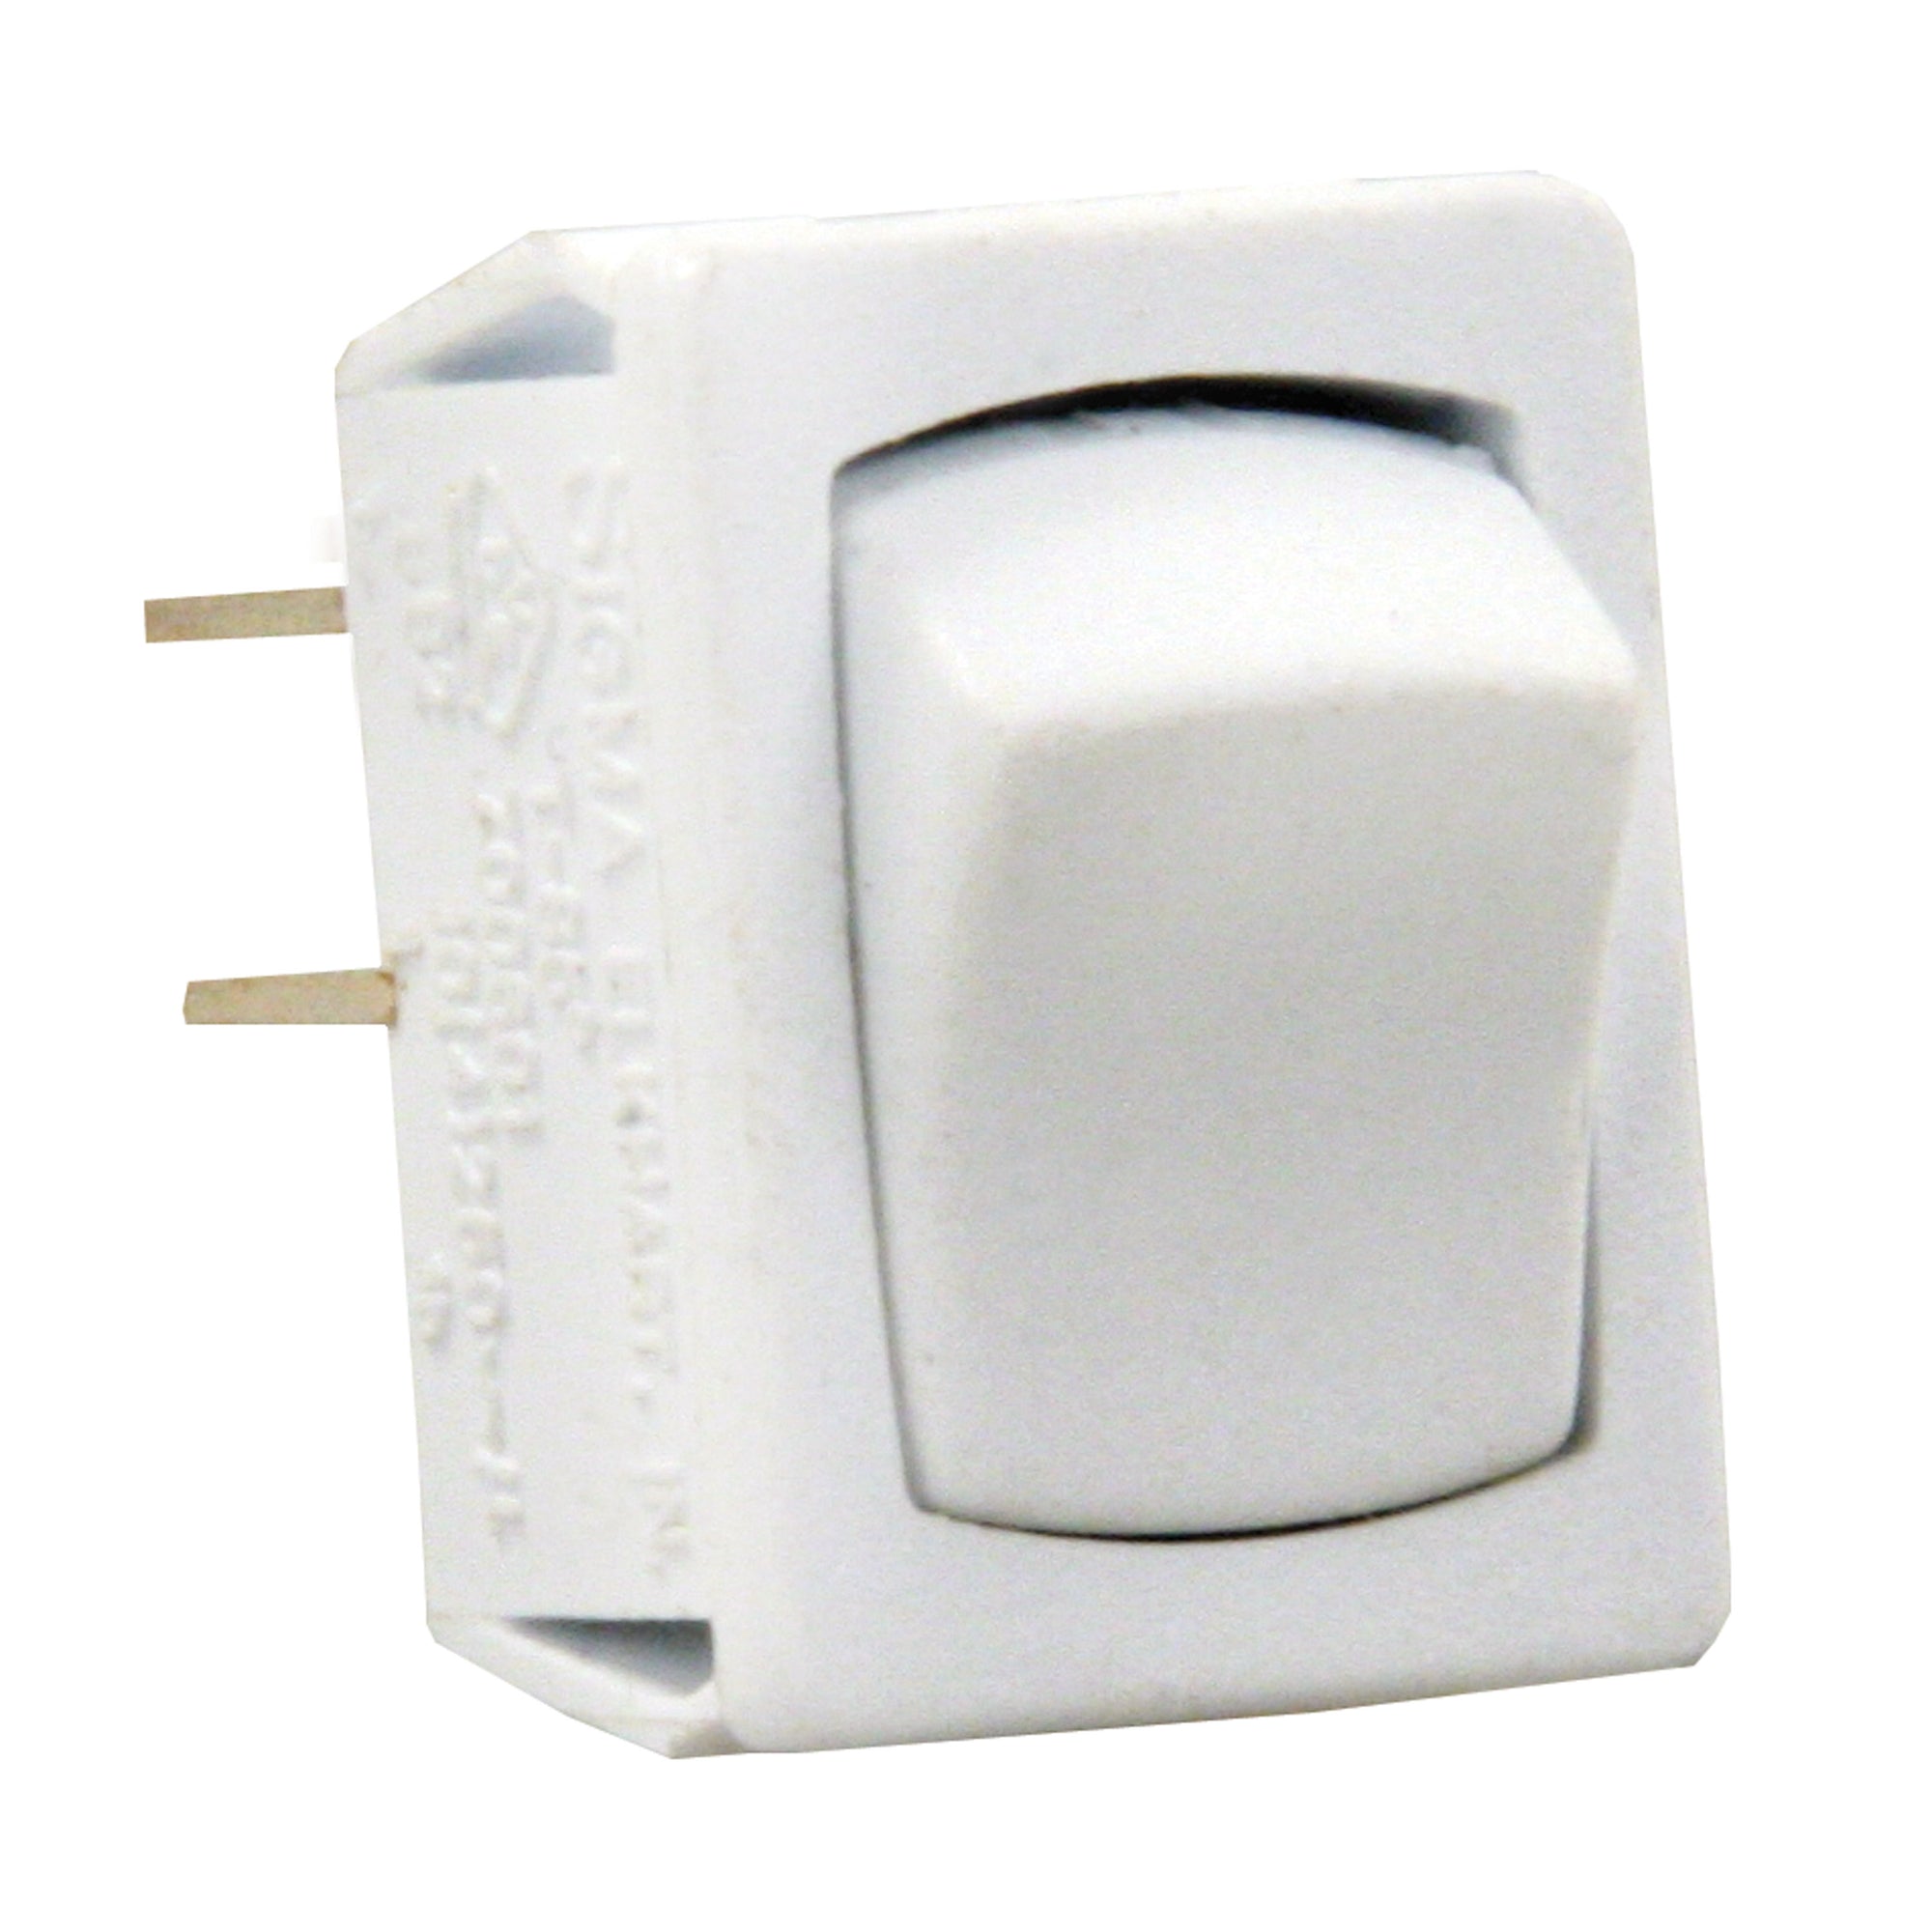 JR Products Mini On/Off Switches - White/White, 1 Pack